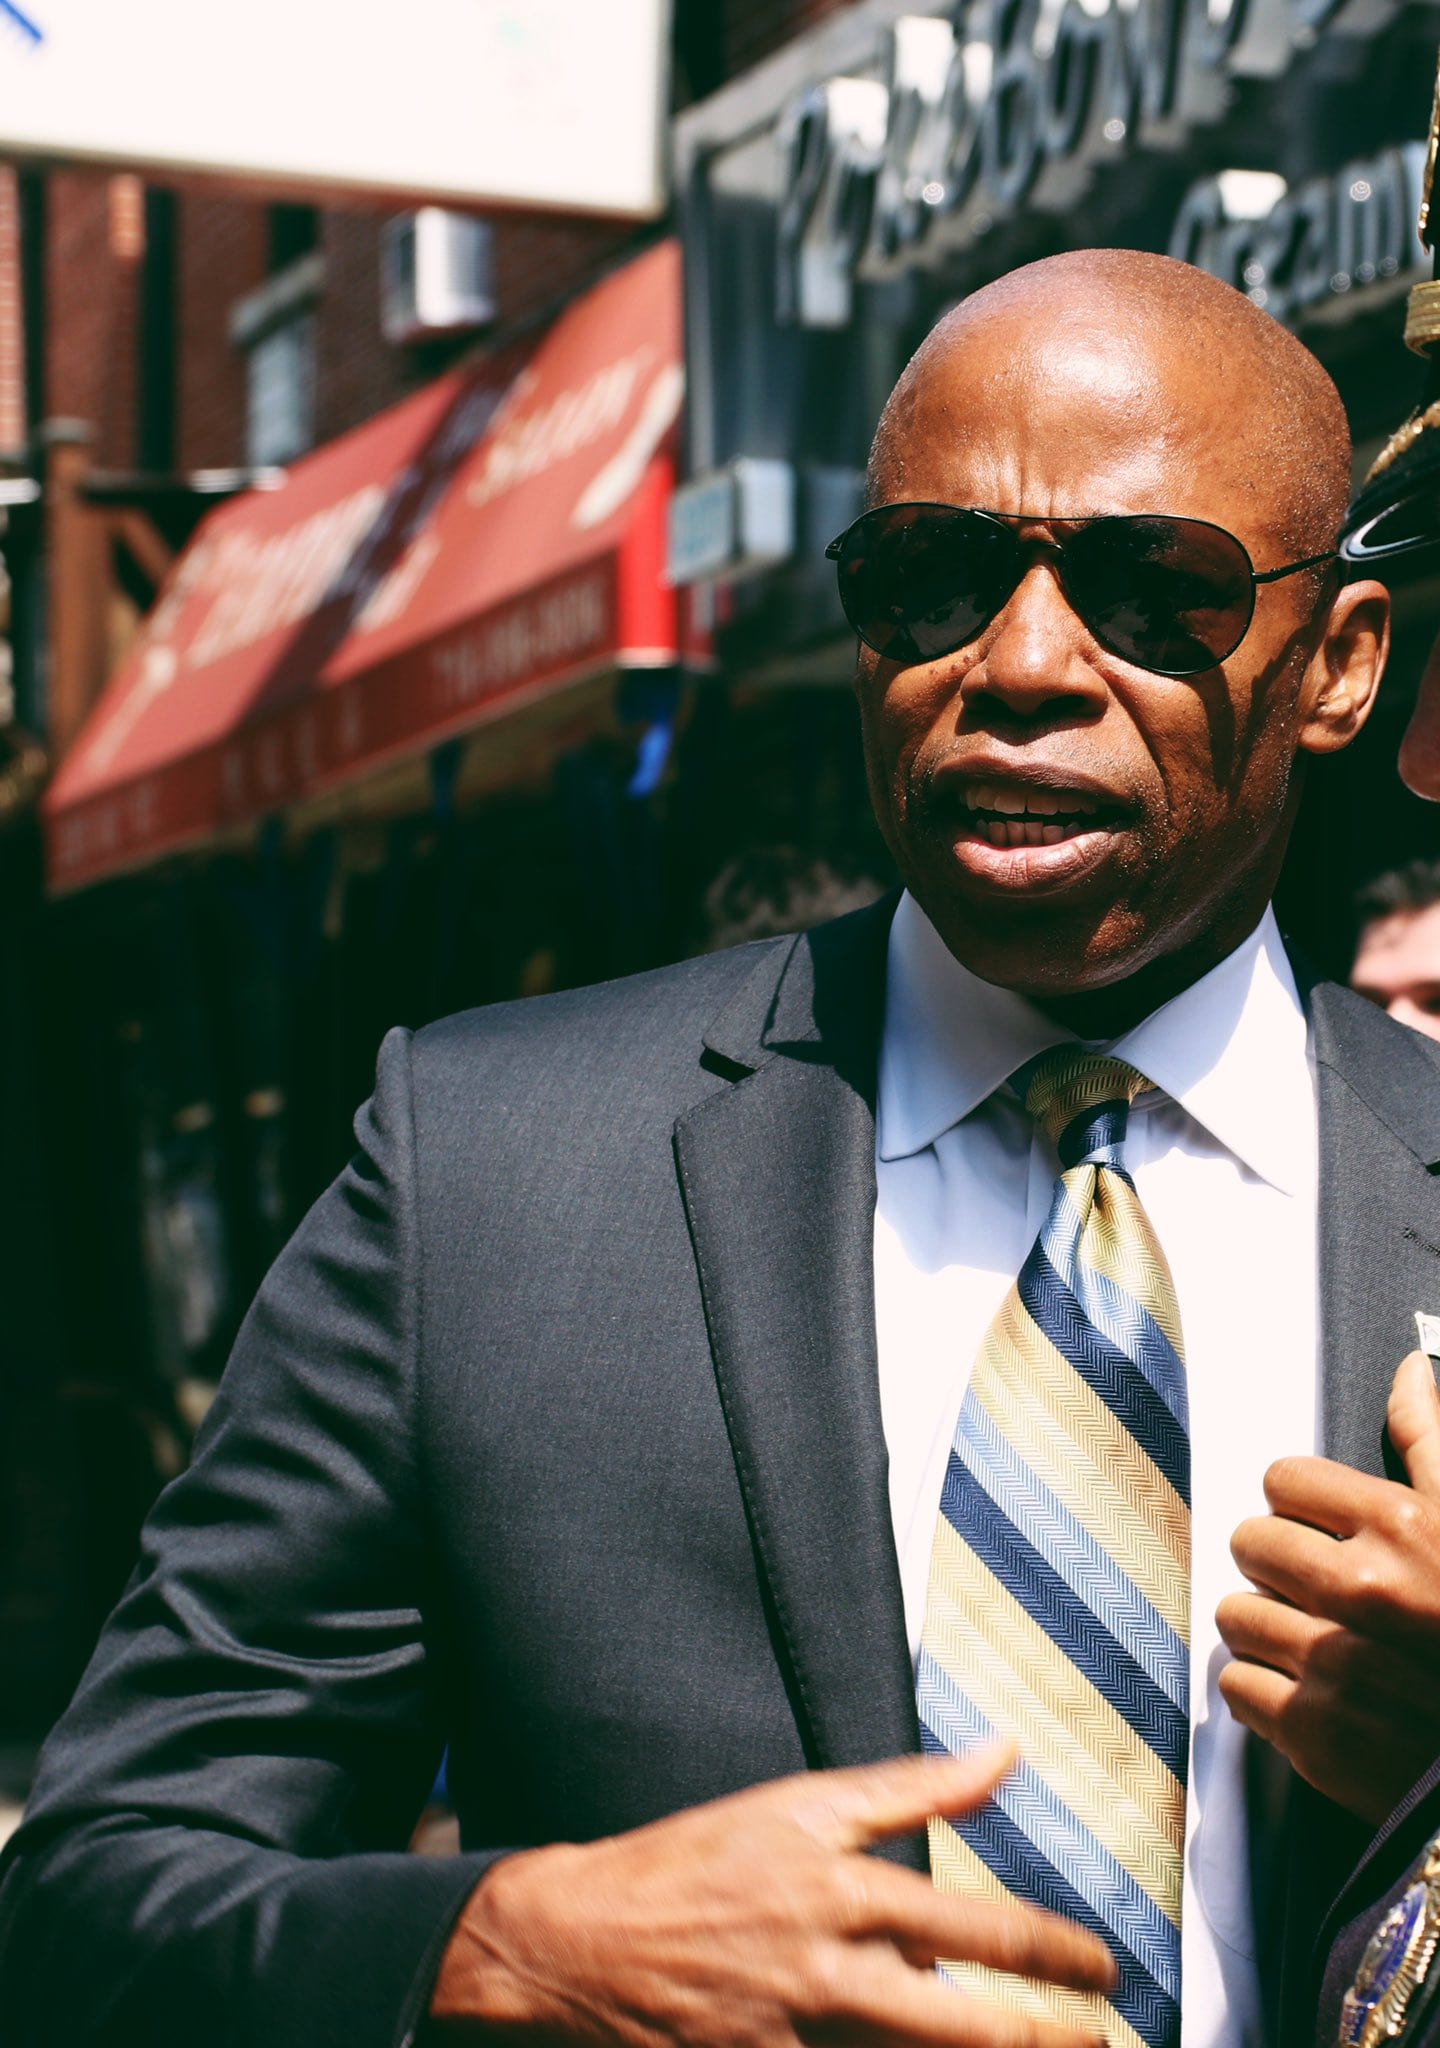 Eric Adams Reveals Fellow Cop May Have Shot at Him. Now the NYC Mayoral Candidate’s Record as an NYPD Critic and Target Takes Center Stage